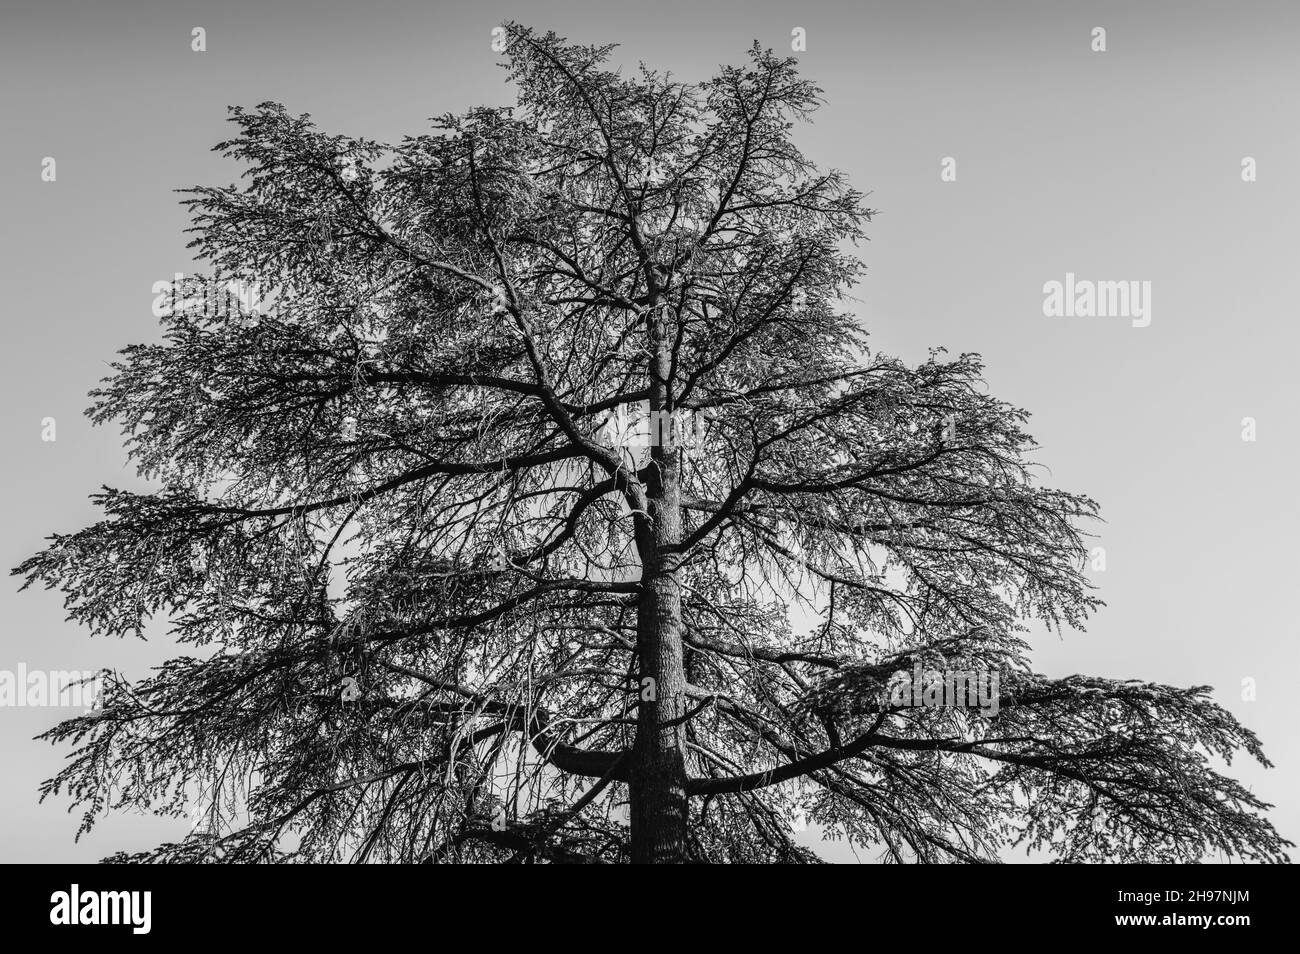 Scenic view of a branchy tree against the sky. Tbilisi Botanical Garden. Georgia. Black and white. Stock Photo